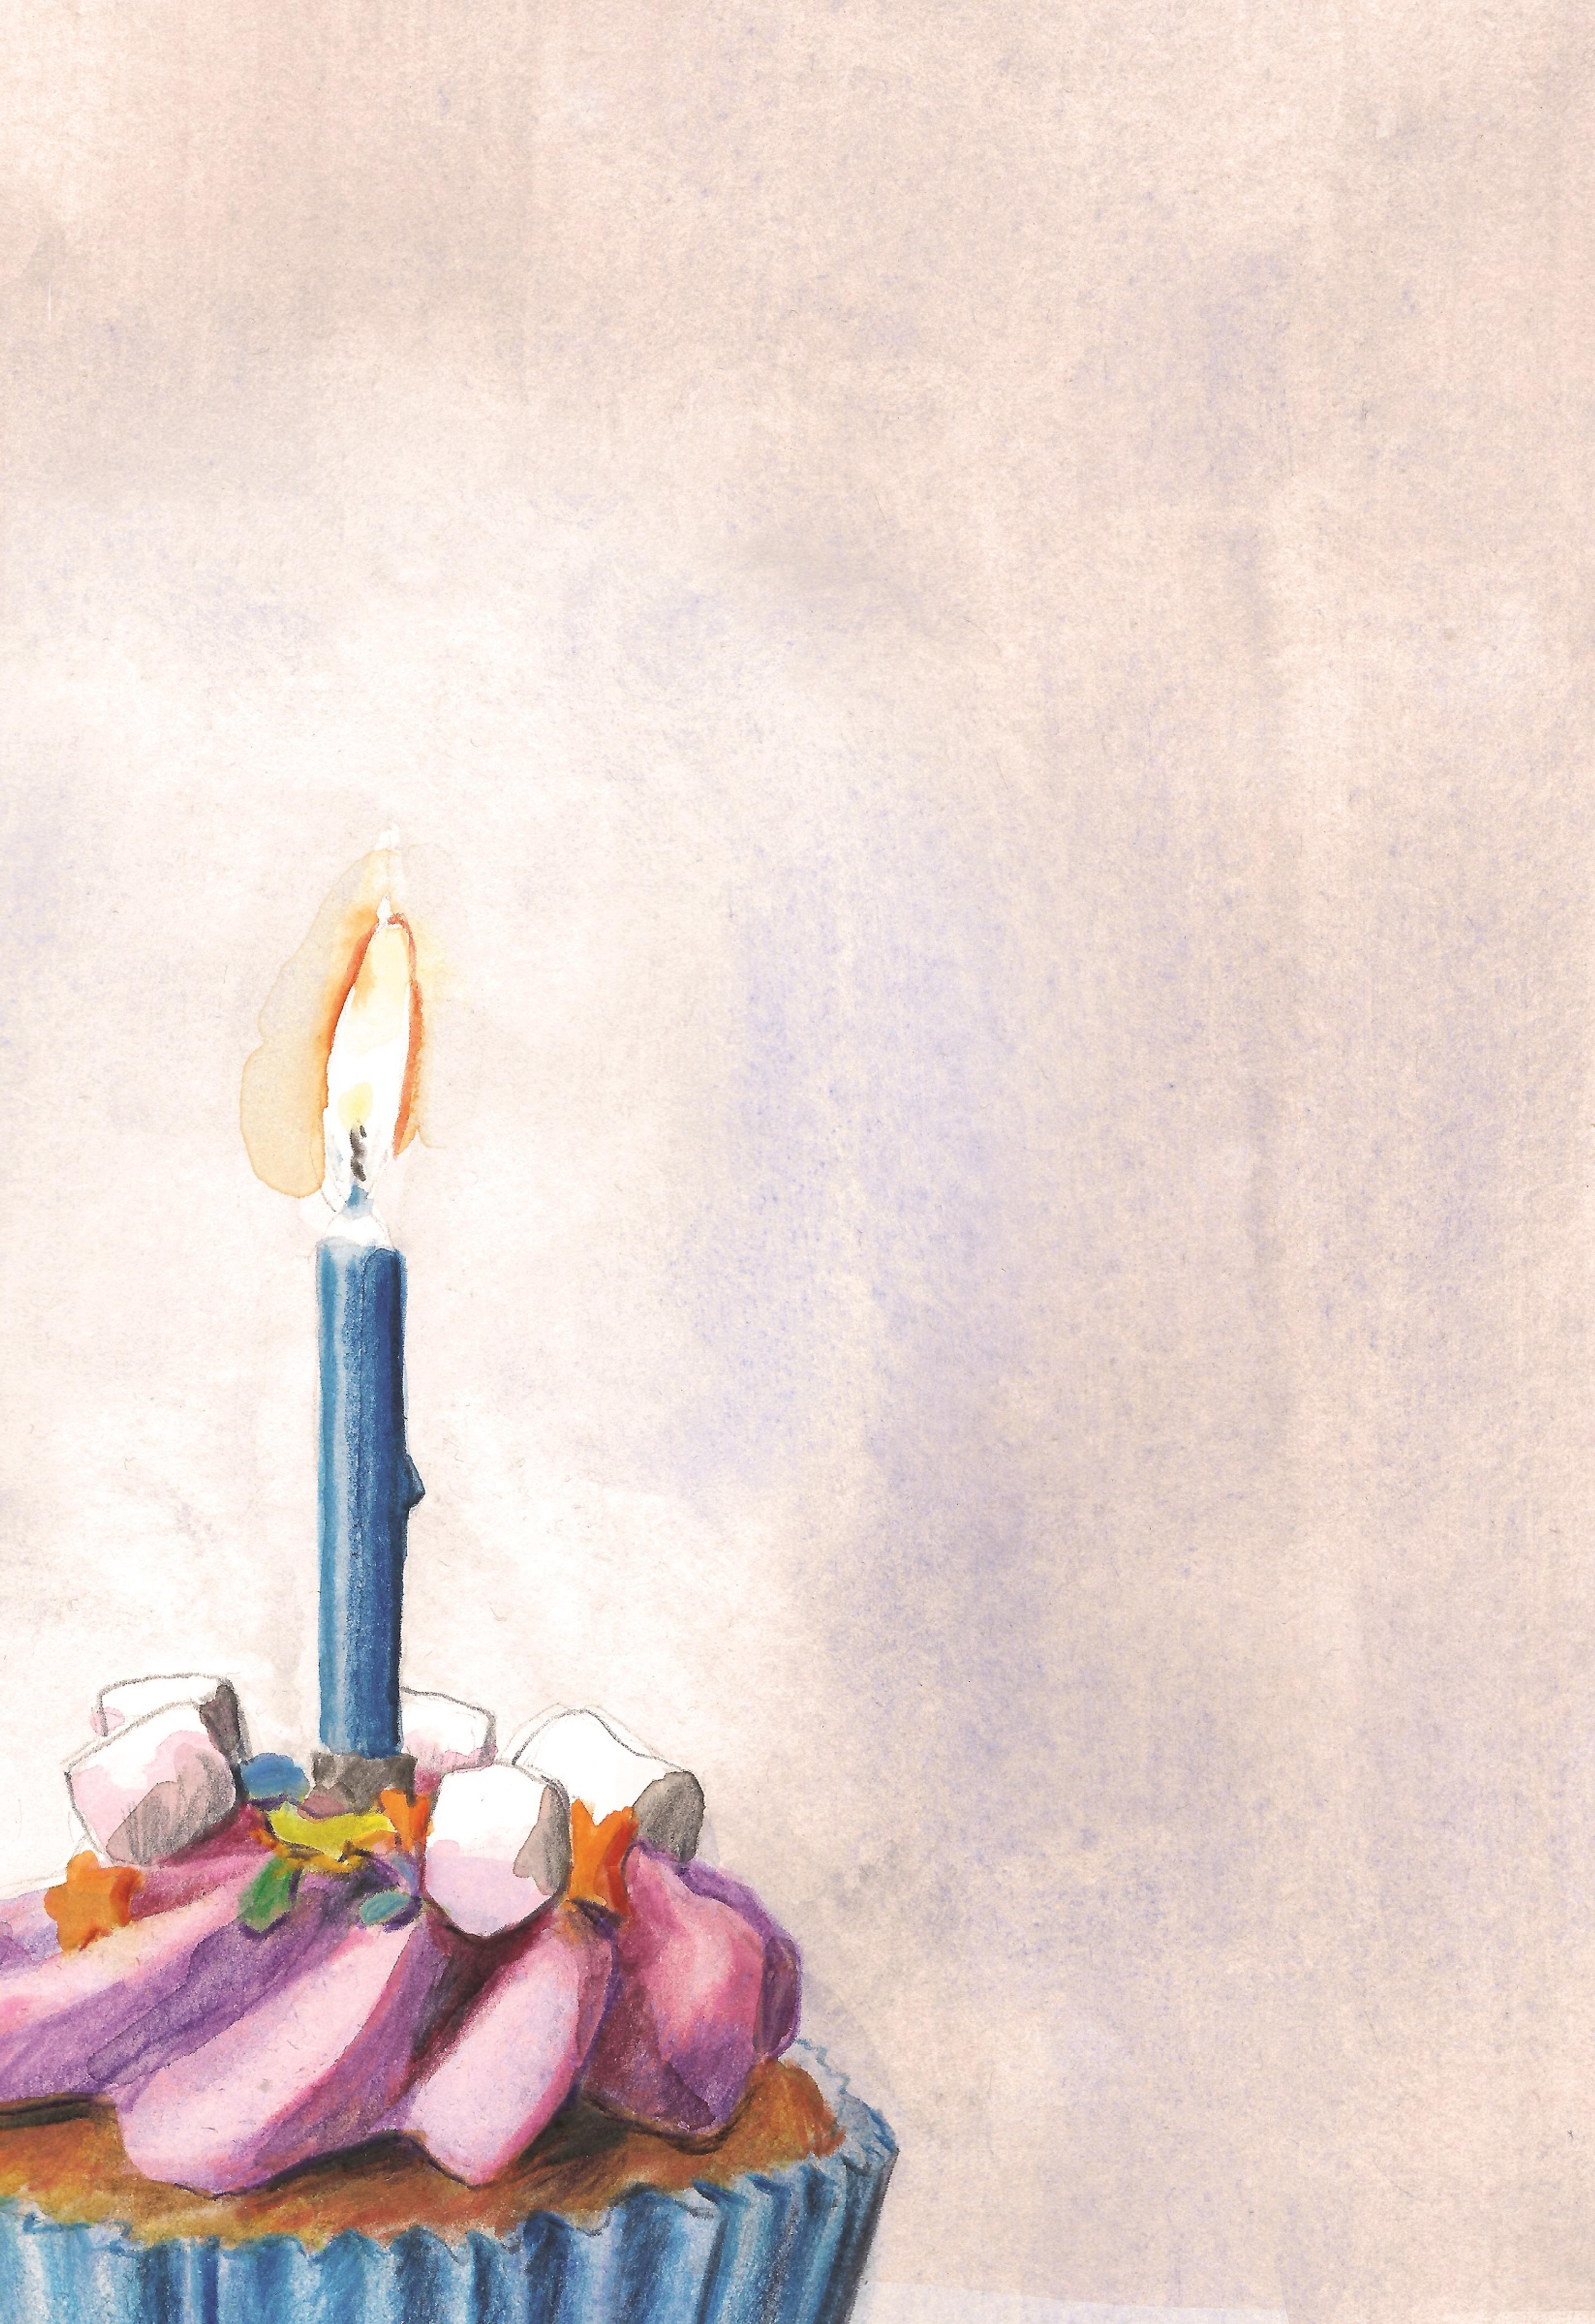 Illustration of an iced cupcake with a lit candle in it